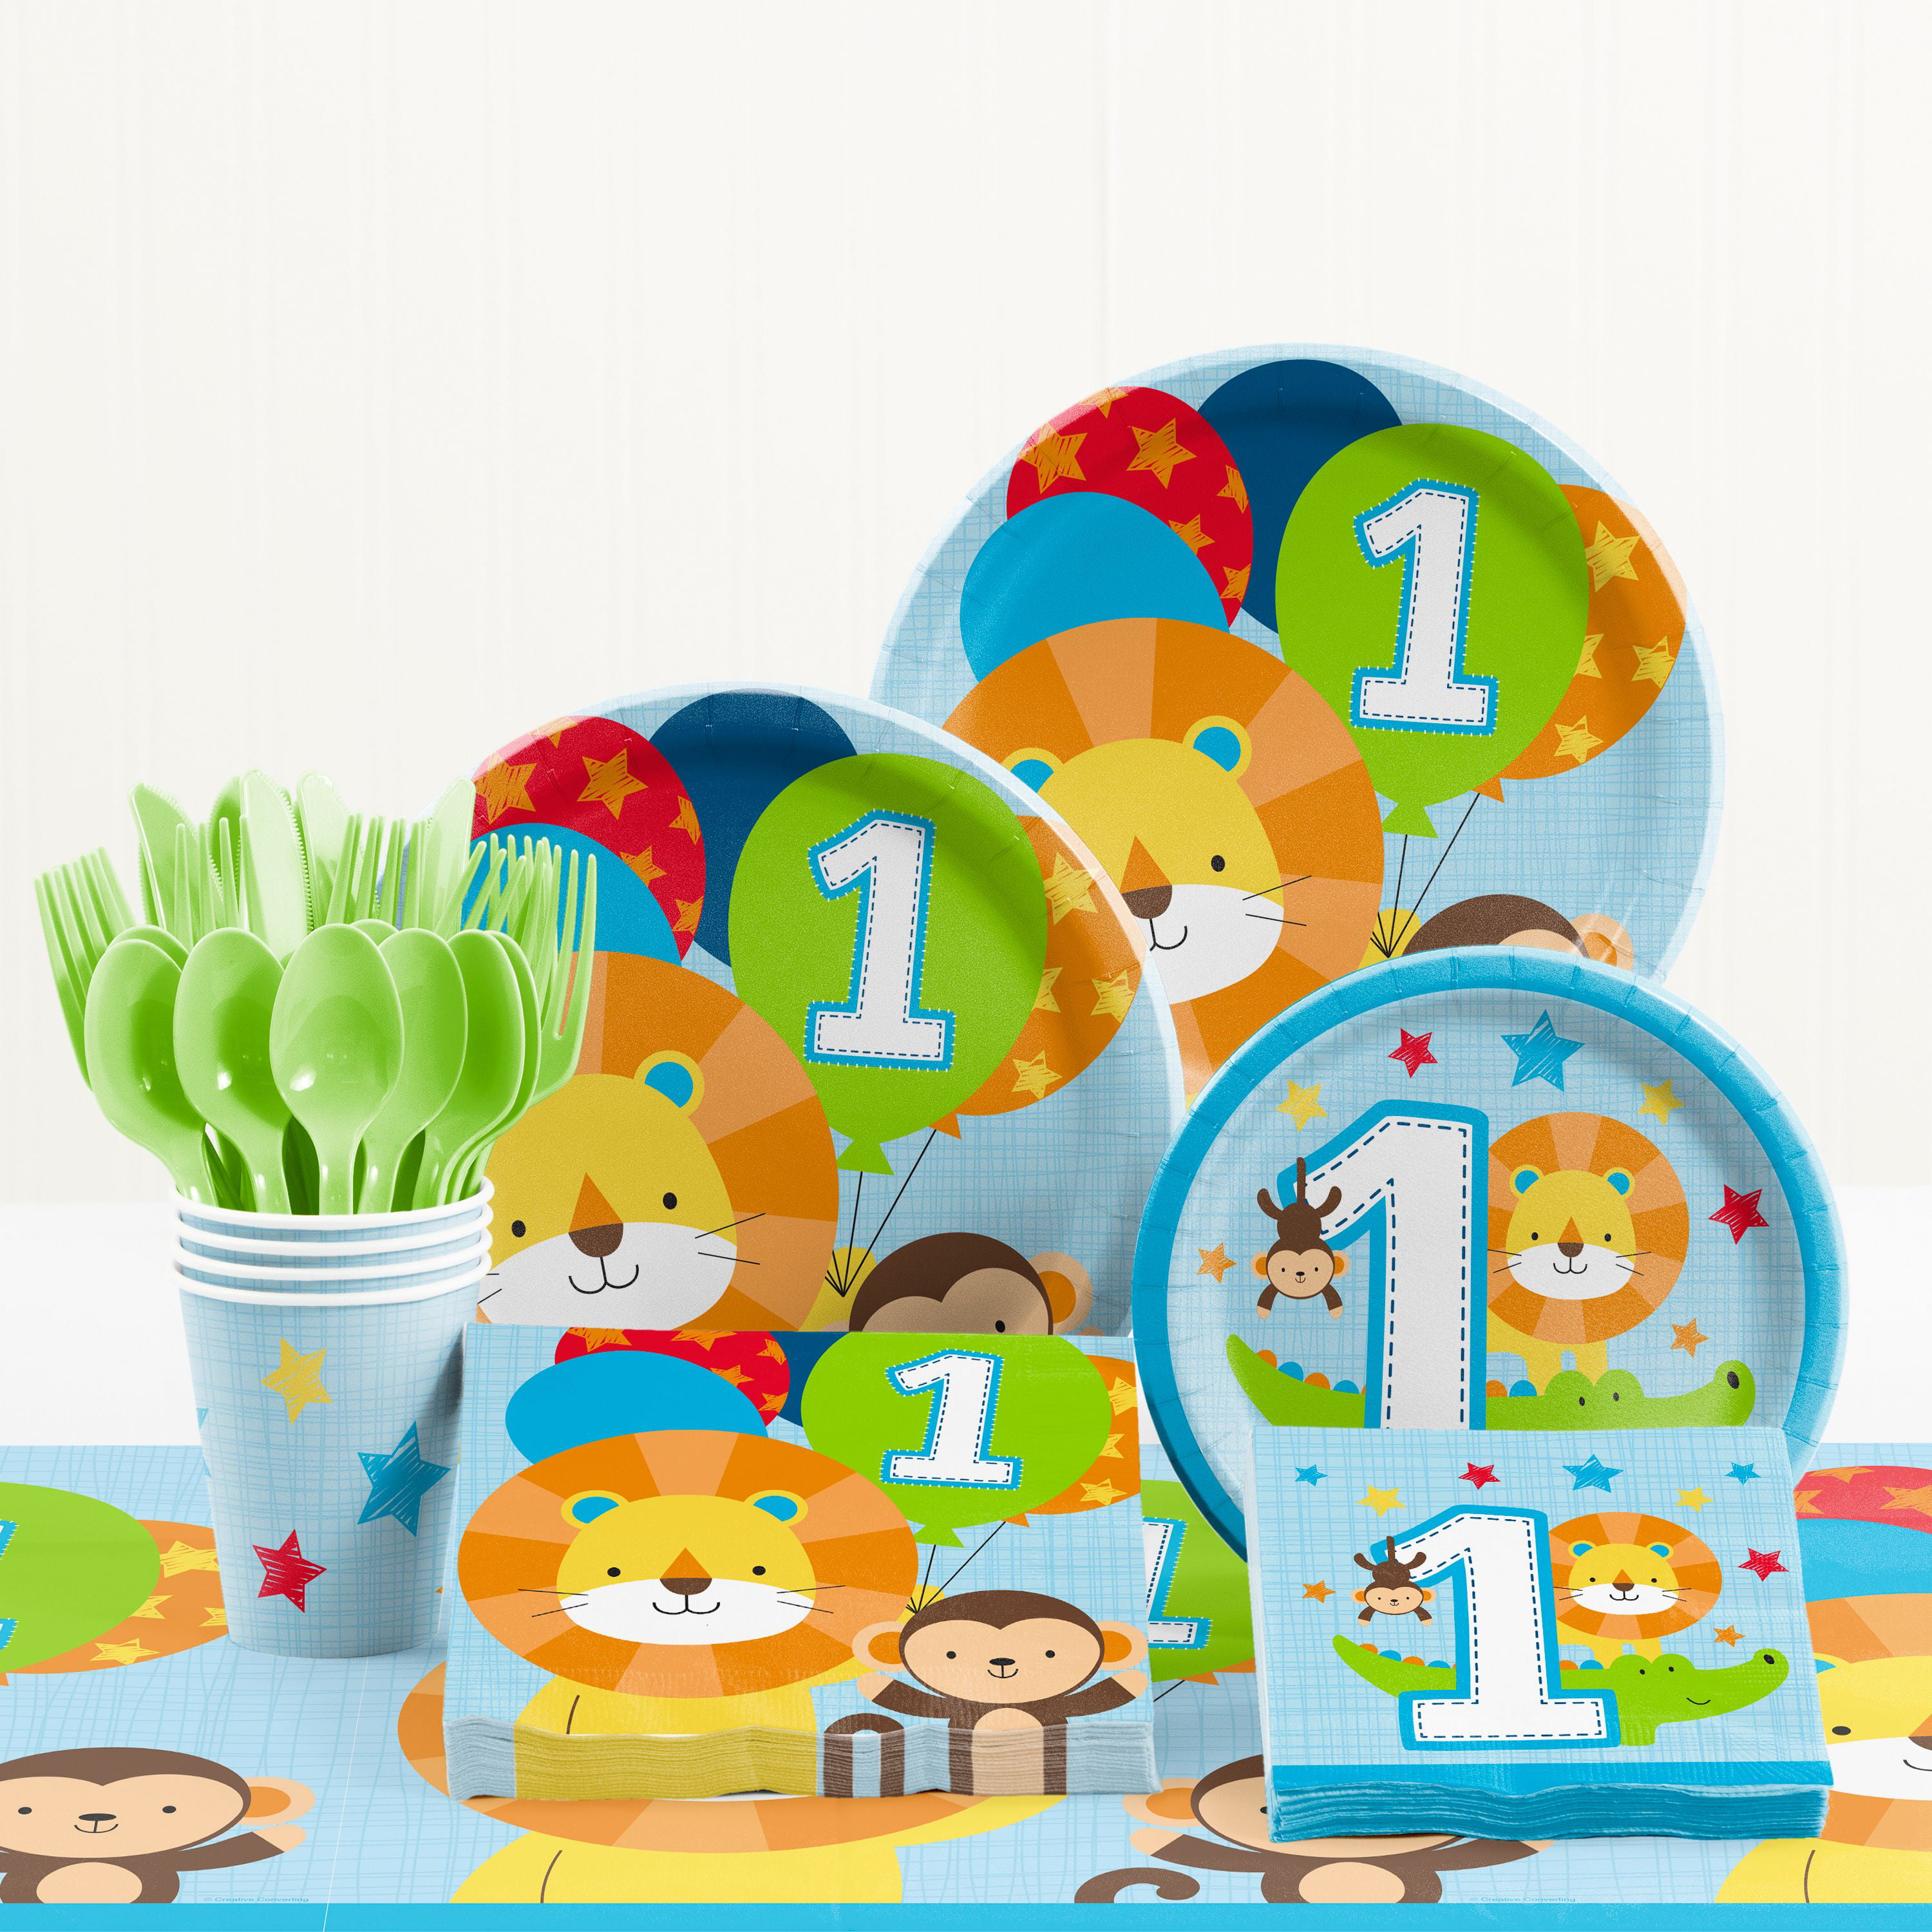 Blues Clues 1st Birthday Party Supplies Birthday Dessert Cake Plates Serves 16 Guests